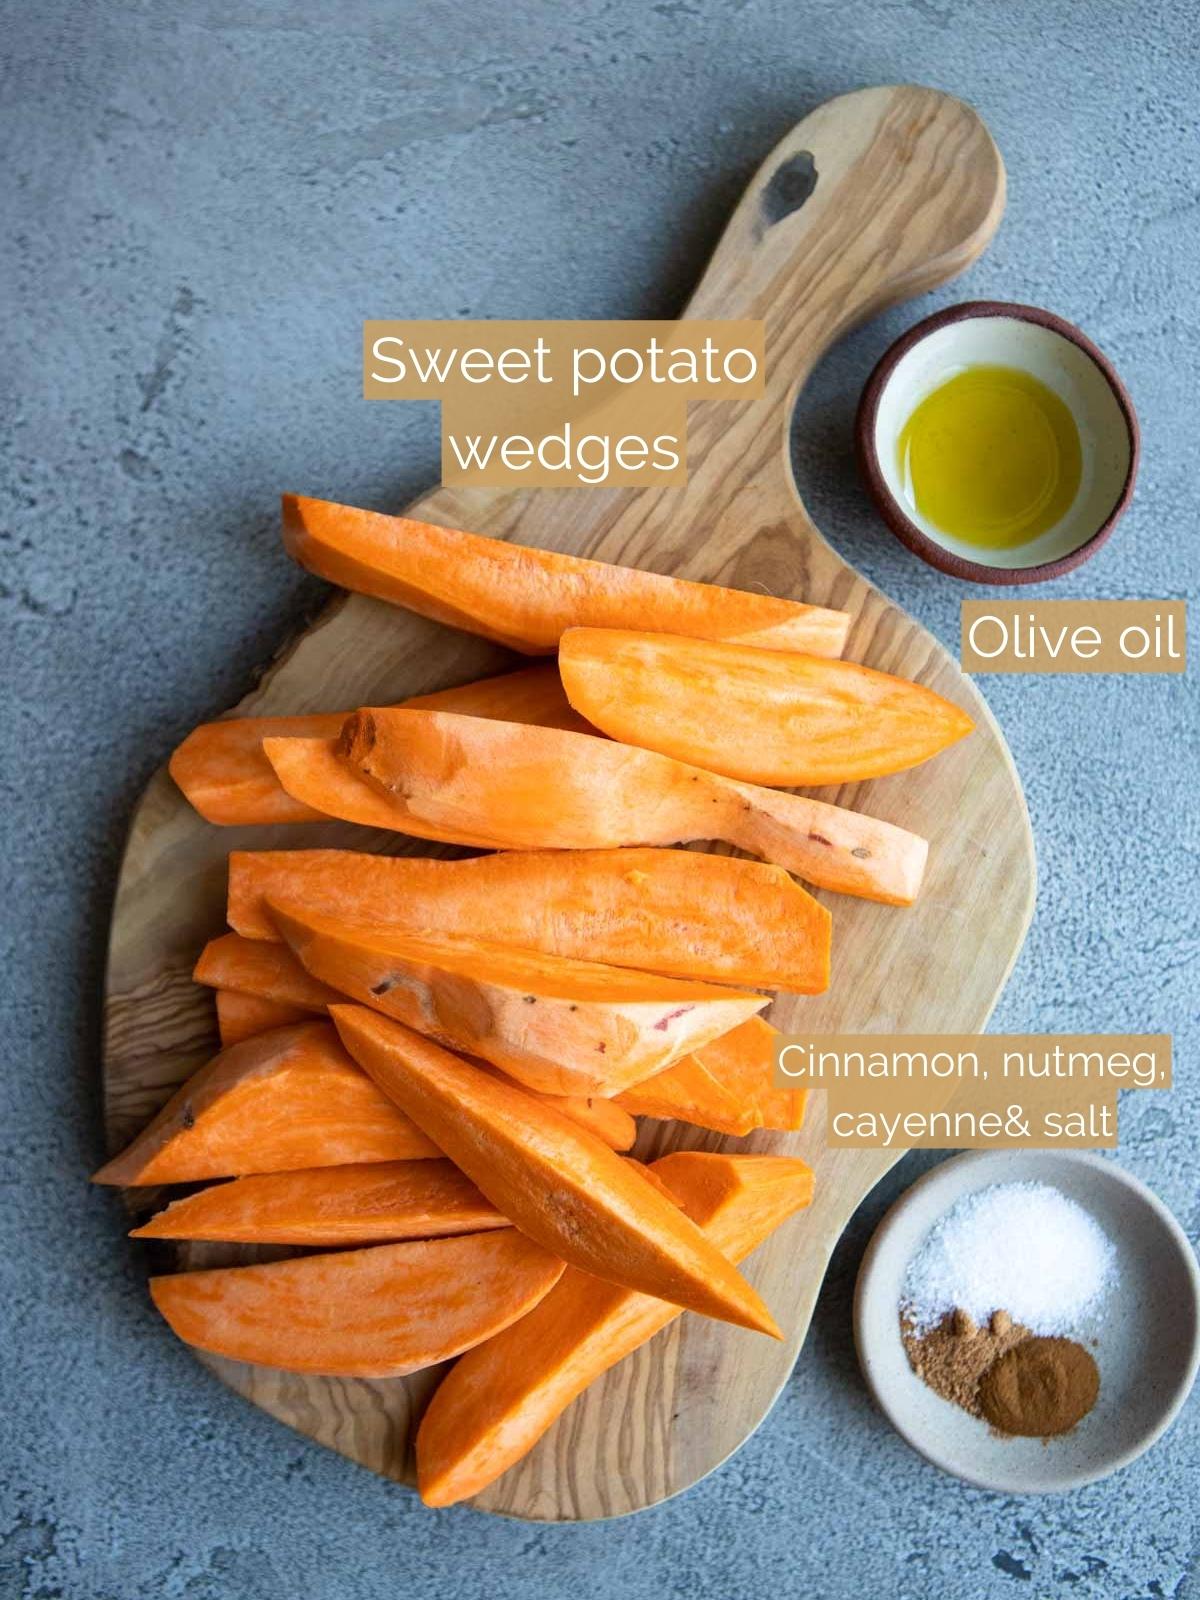 uncooked sweet potato wedges on a wood board net to a small bowl of olive oil and seasonings